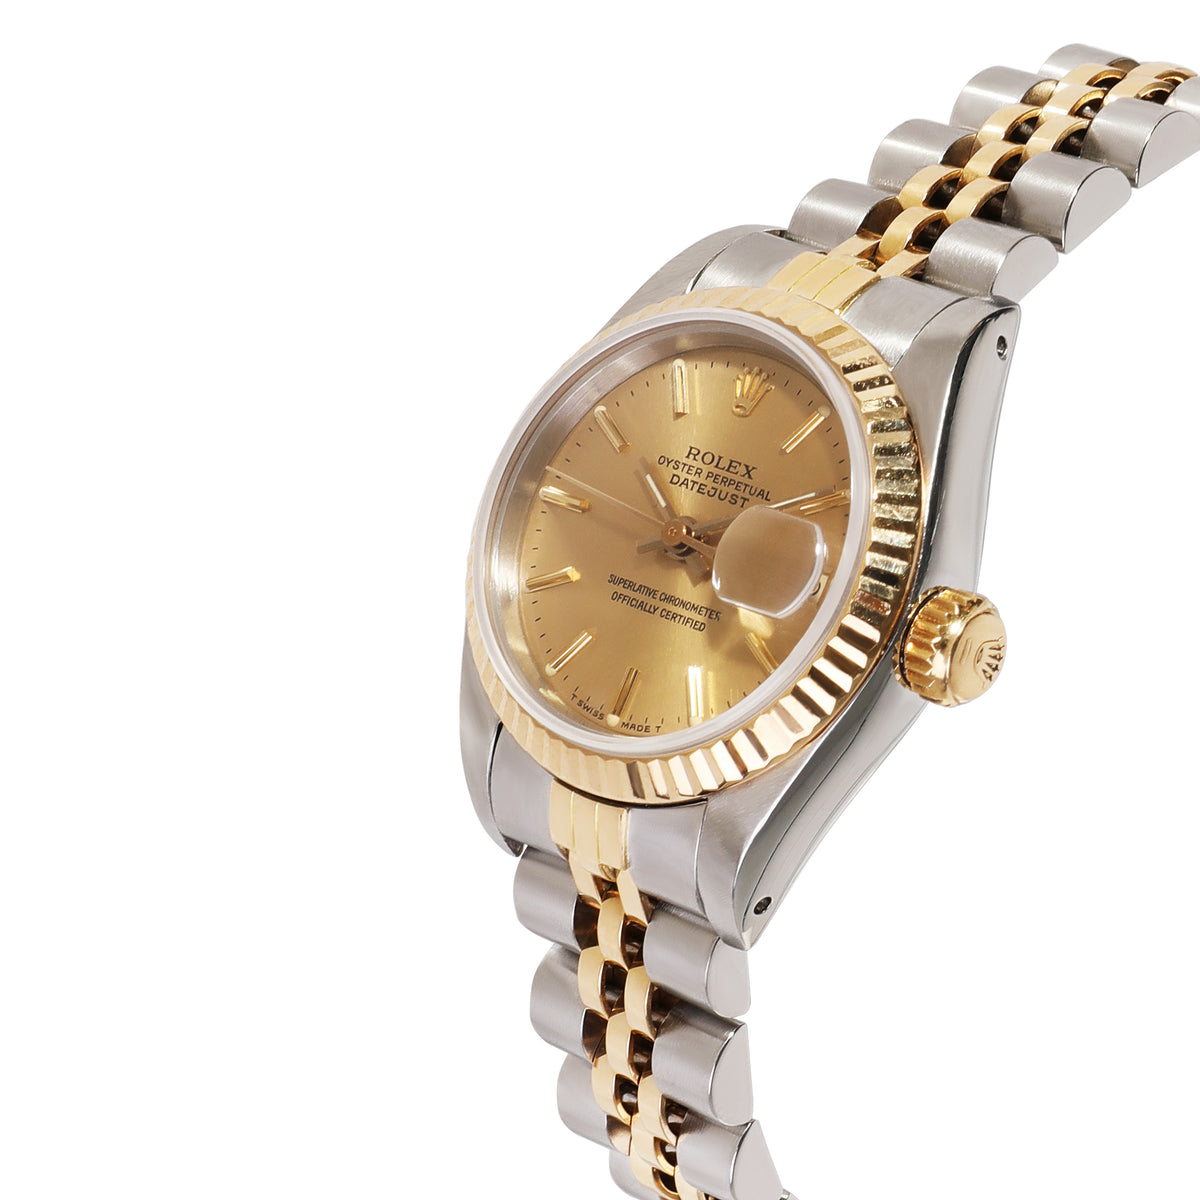 Rolex Datejust 69173 Women's Watch in  Stainless Steel/Yellow Gold